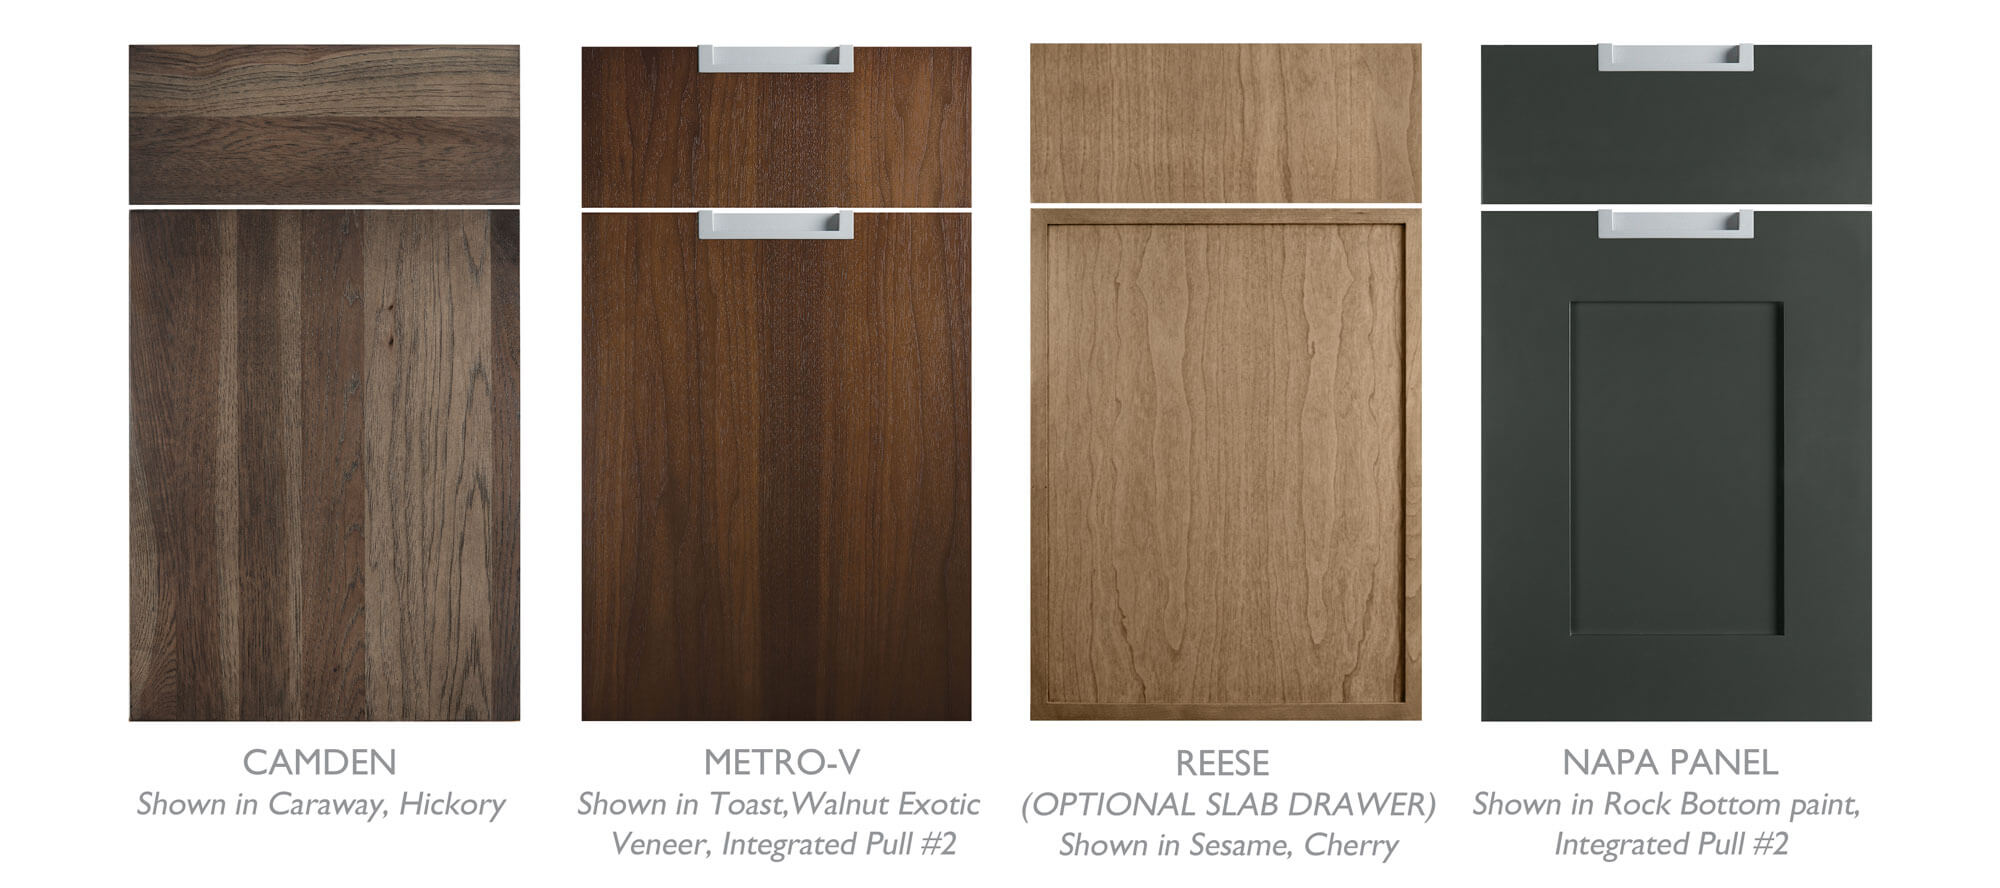 Example of Mid-Century Modern cabinet door styles from Dura Supreme Cabinetry.